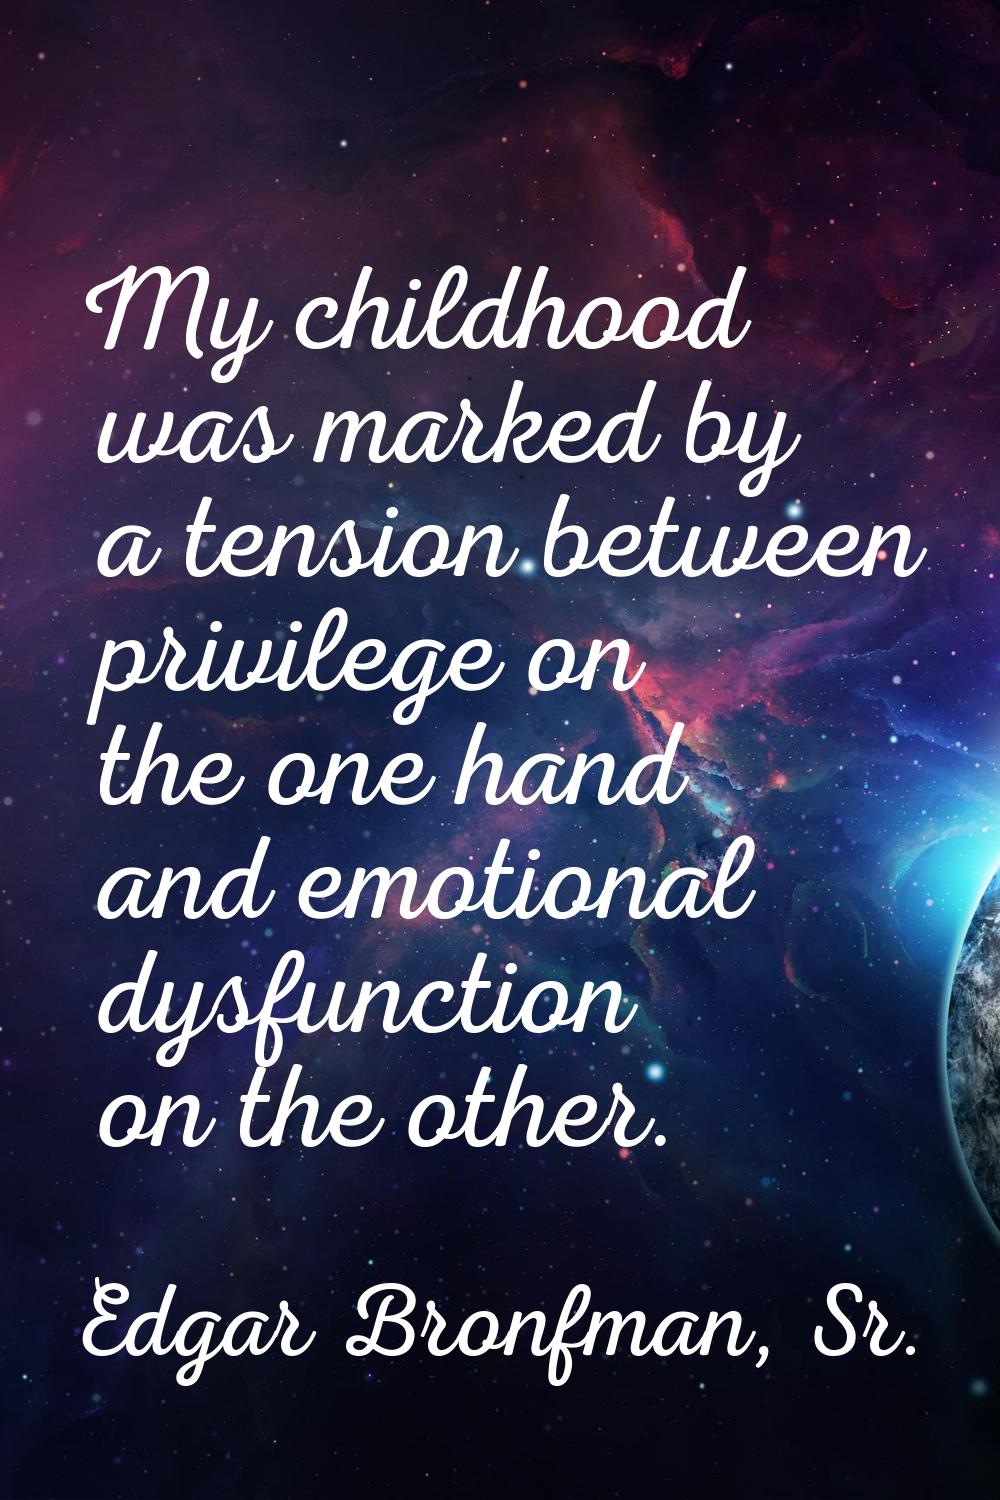 My childhood was marked by a tension between privilege on the one hand and emotional dysfunction on